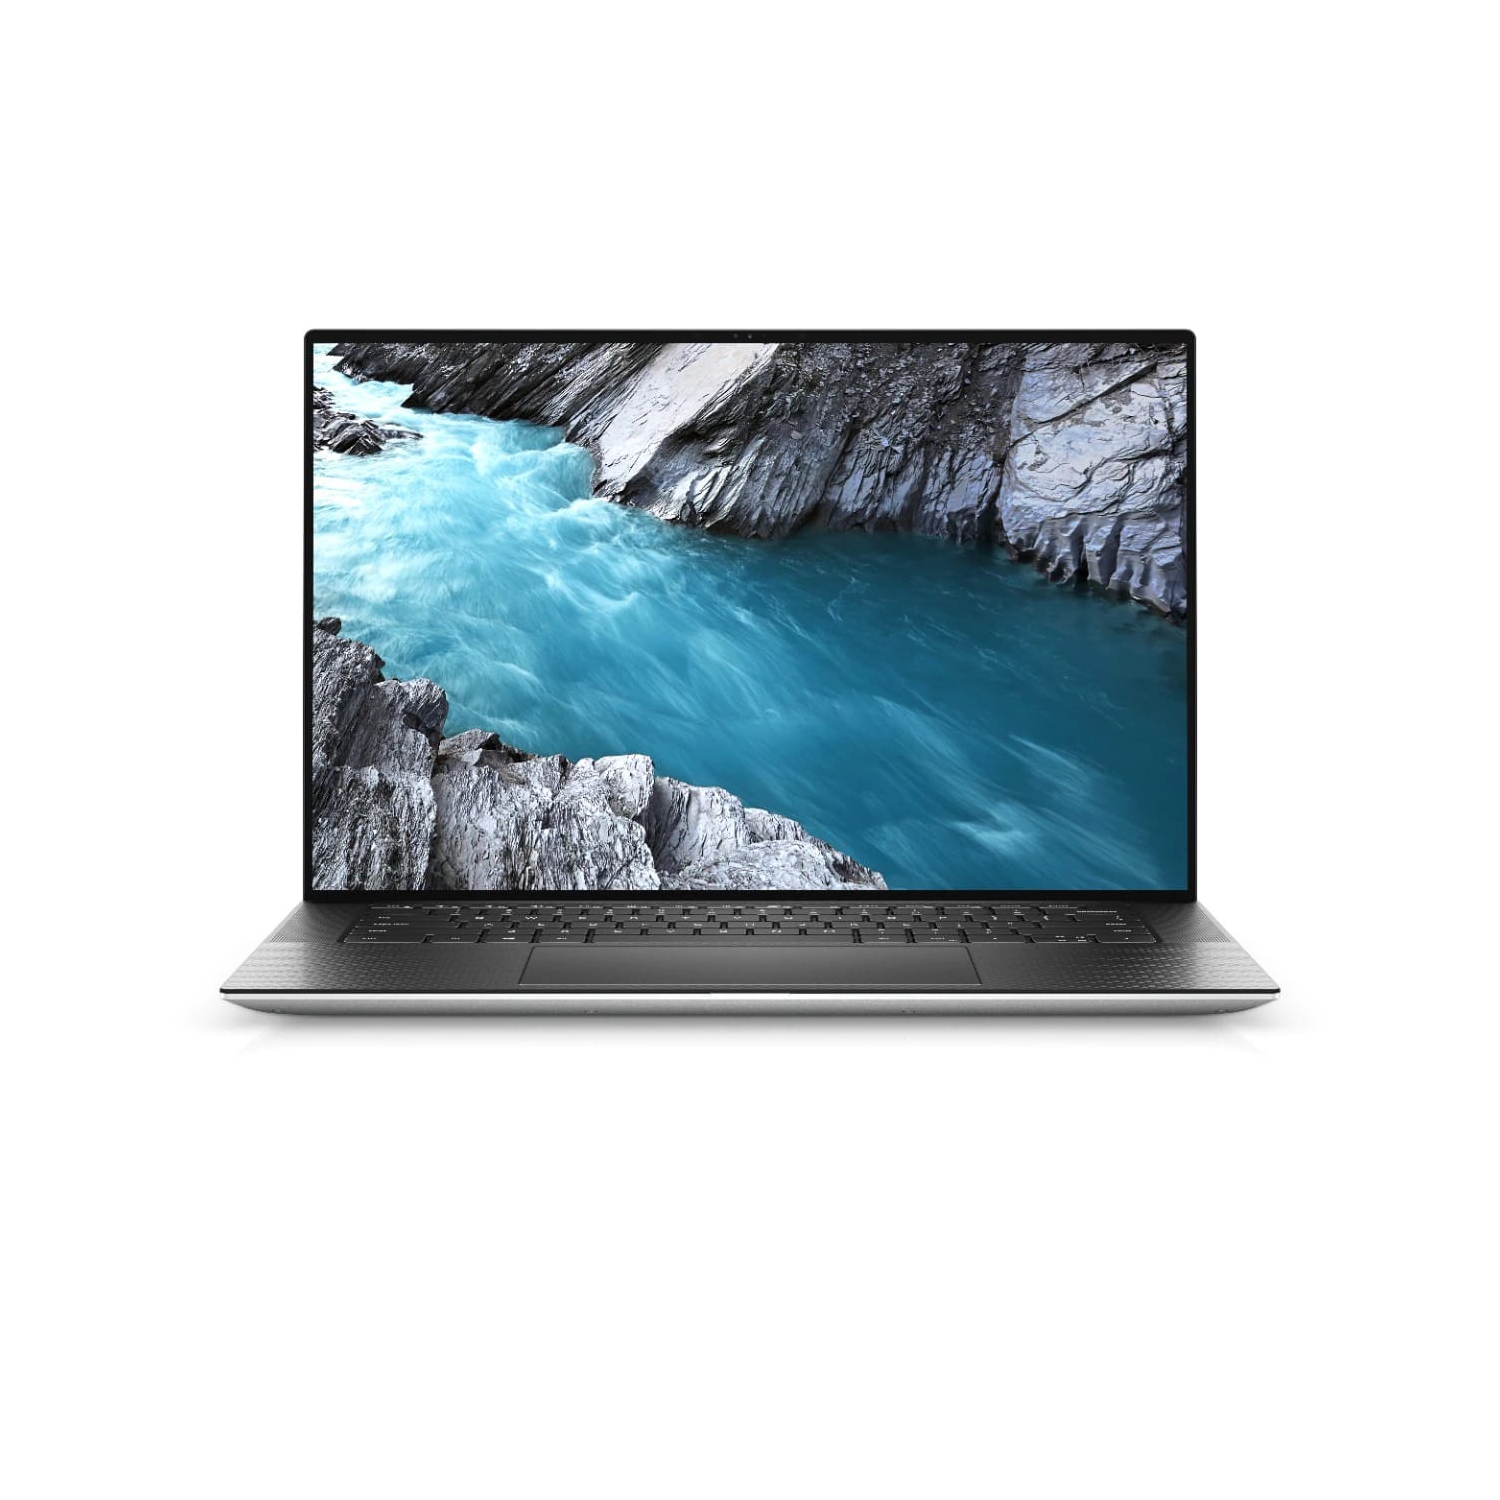 Refurbished (Excellent) - Dell XPS 15 9500 Laptop (2020), 15" 4K Touch, Core i9 - 512GB SSD - 16GB RAM - 1650 Ti, 8 Cores @ 5.3 GHz - 10th Gen CPU Certified Refurbished